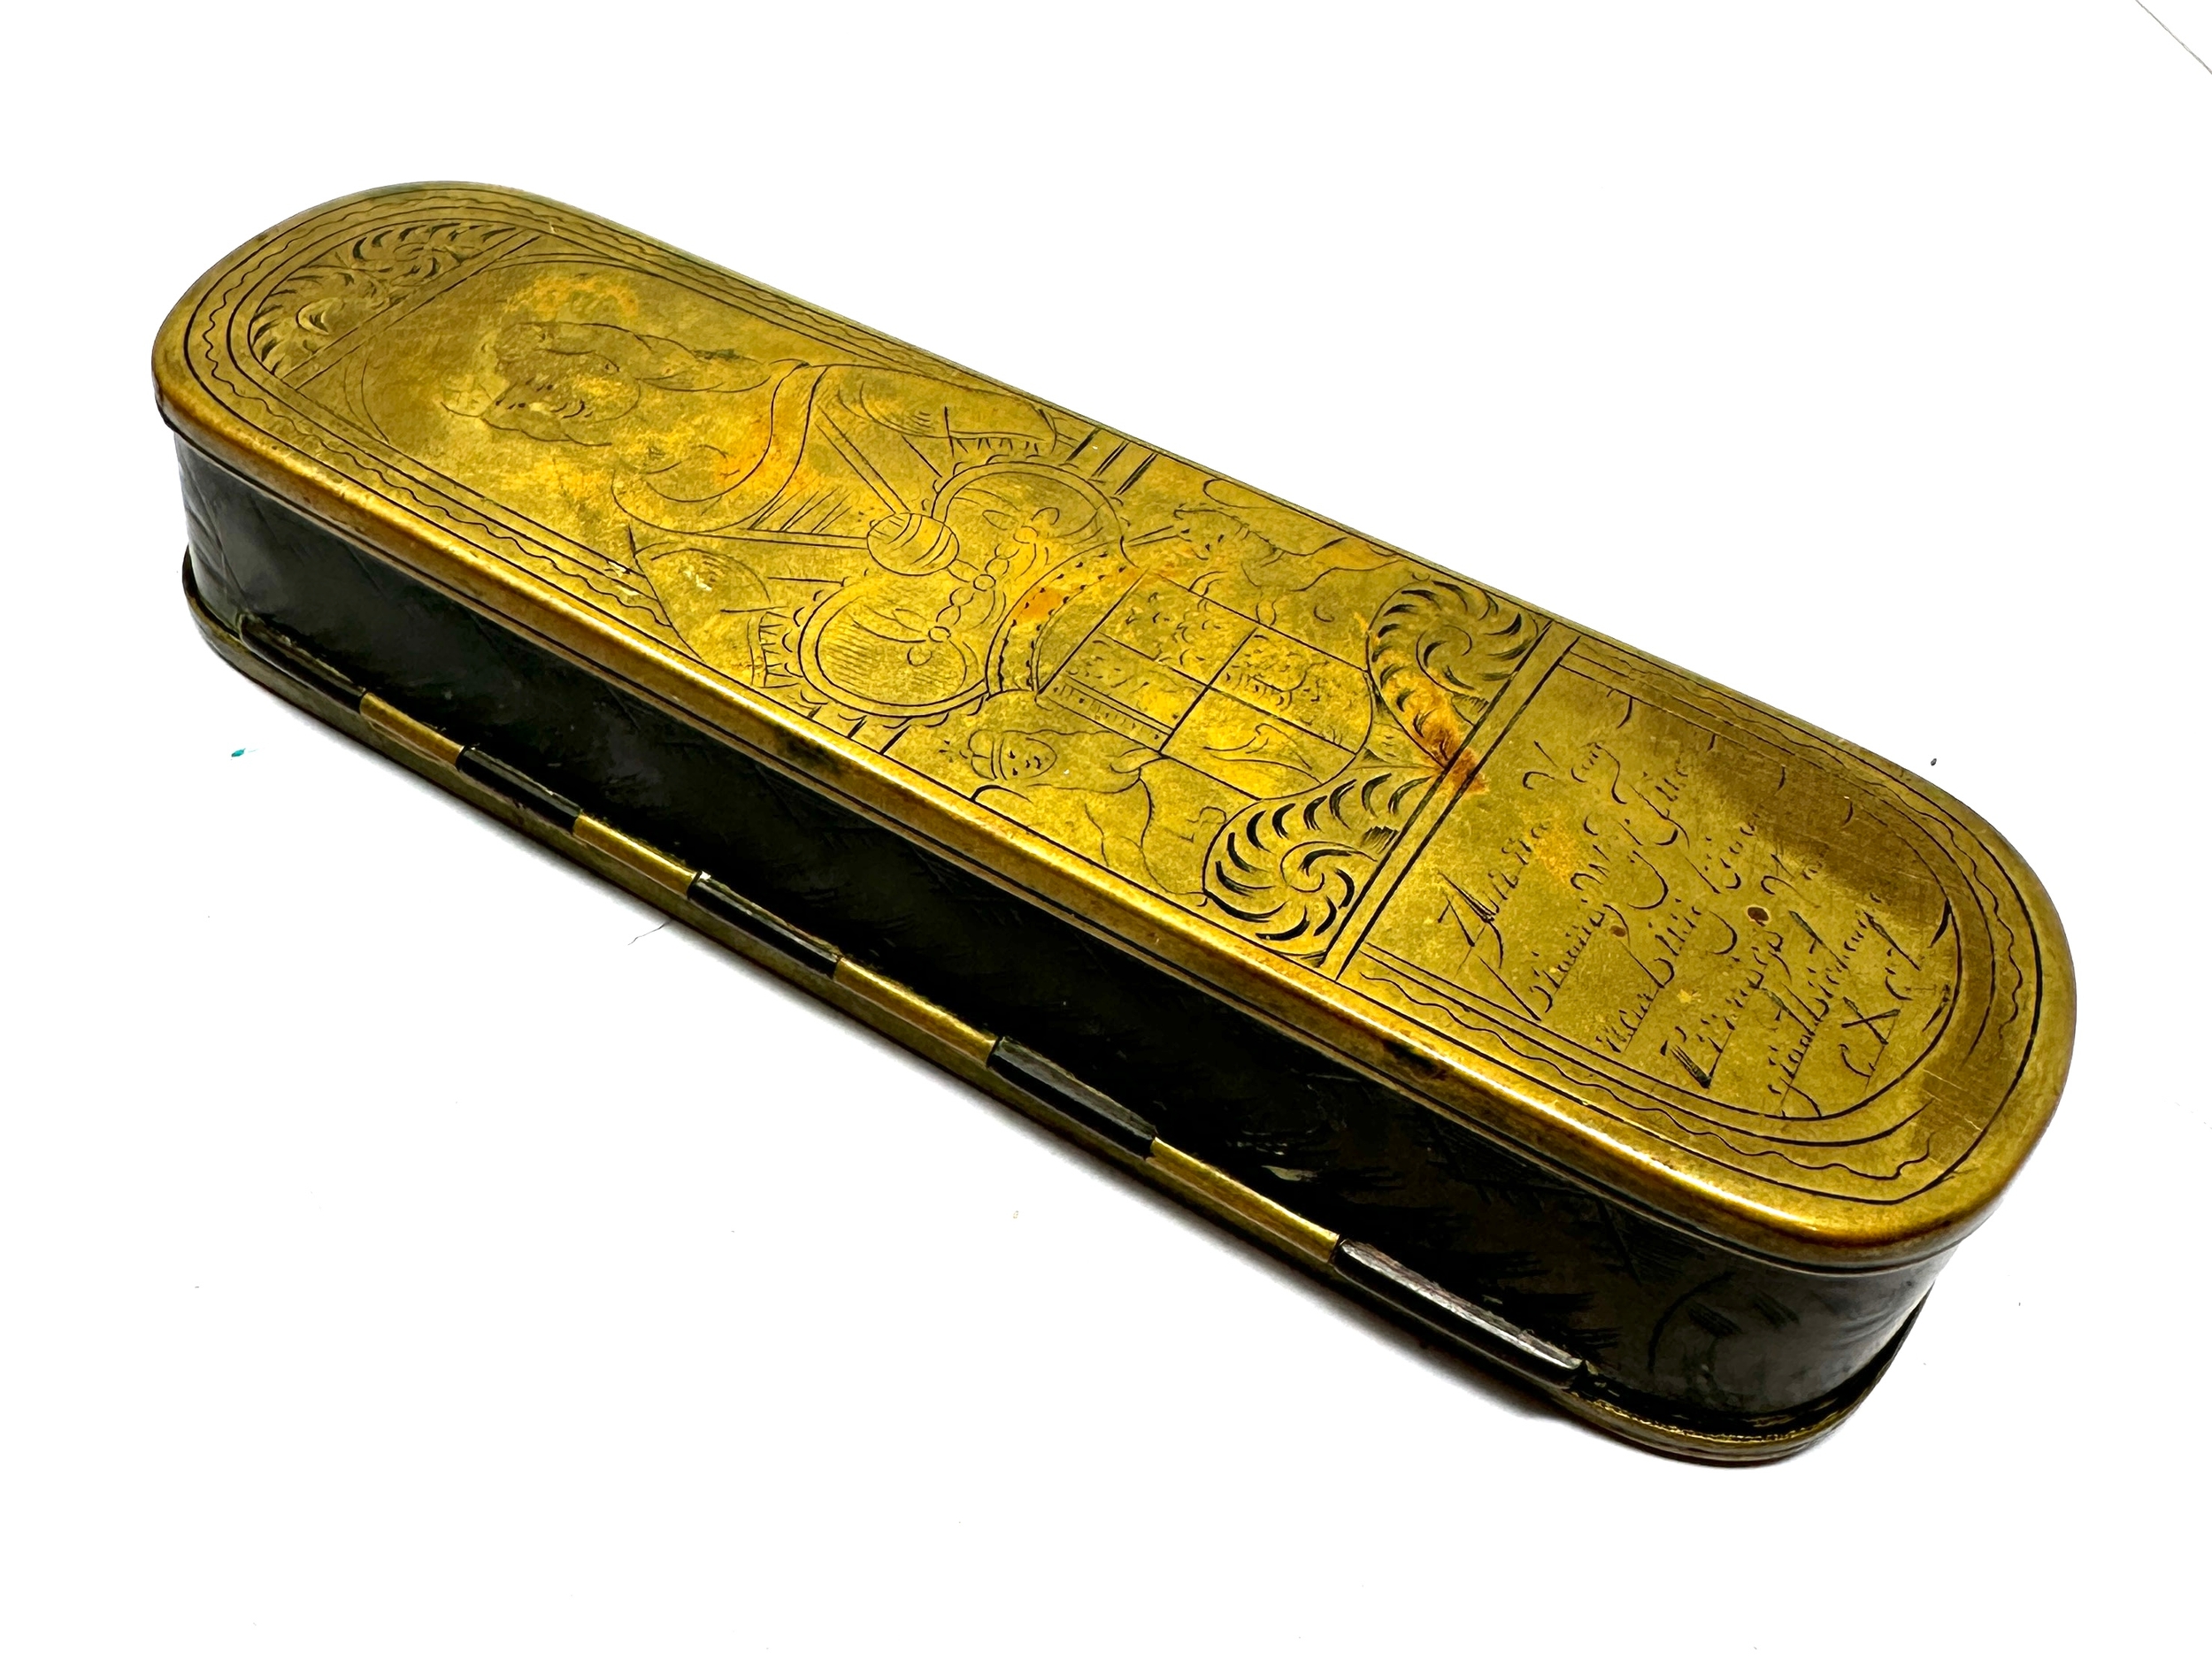 An 18th century Dutch brass tobacco box engraved dated 1747 - Image 2 of 4